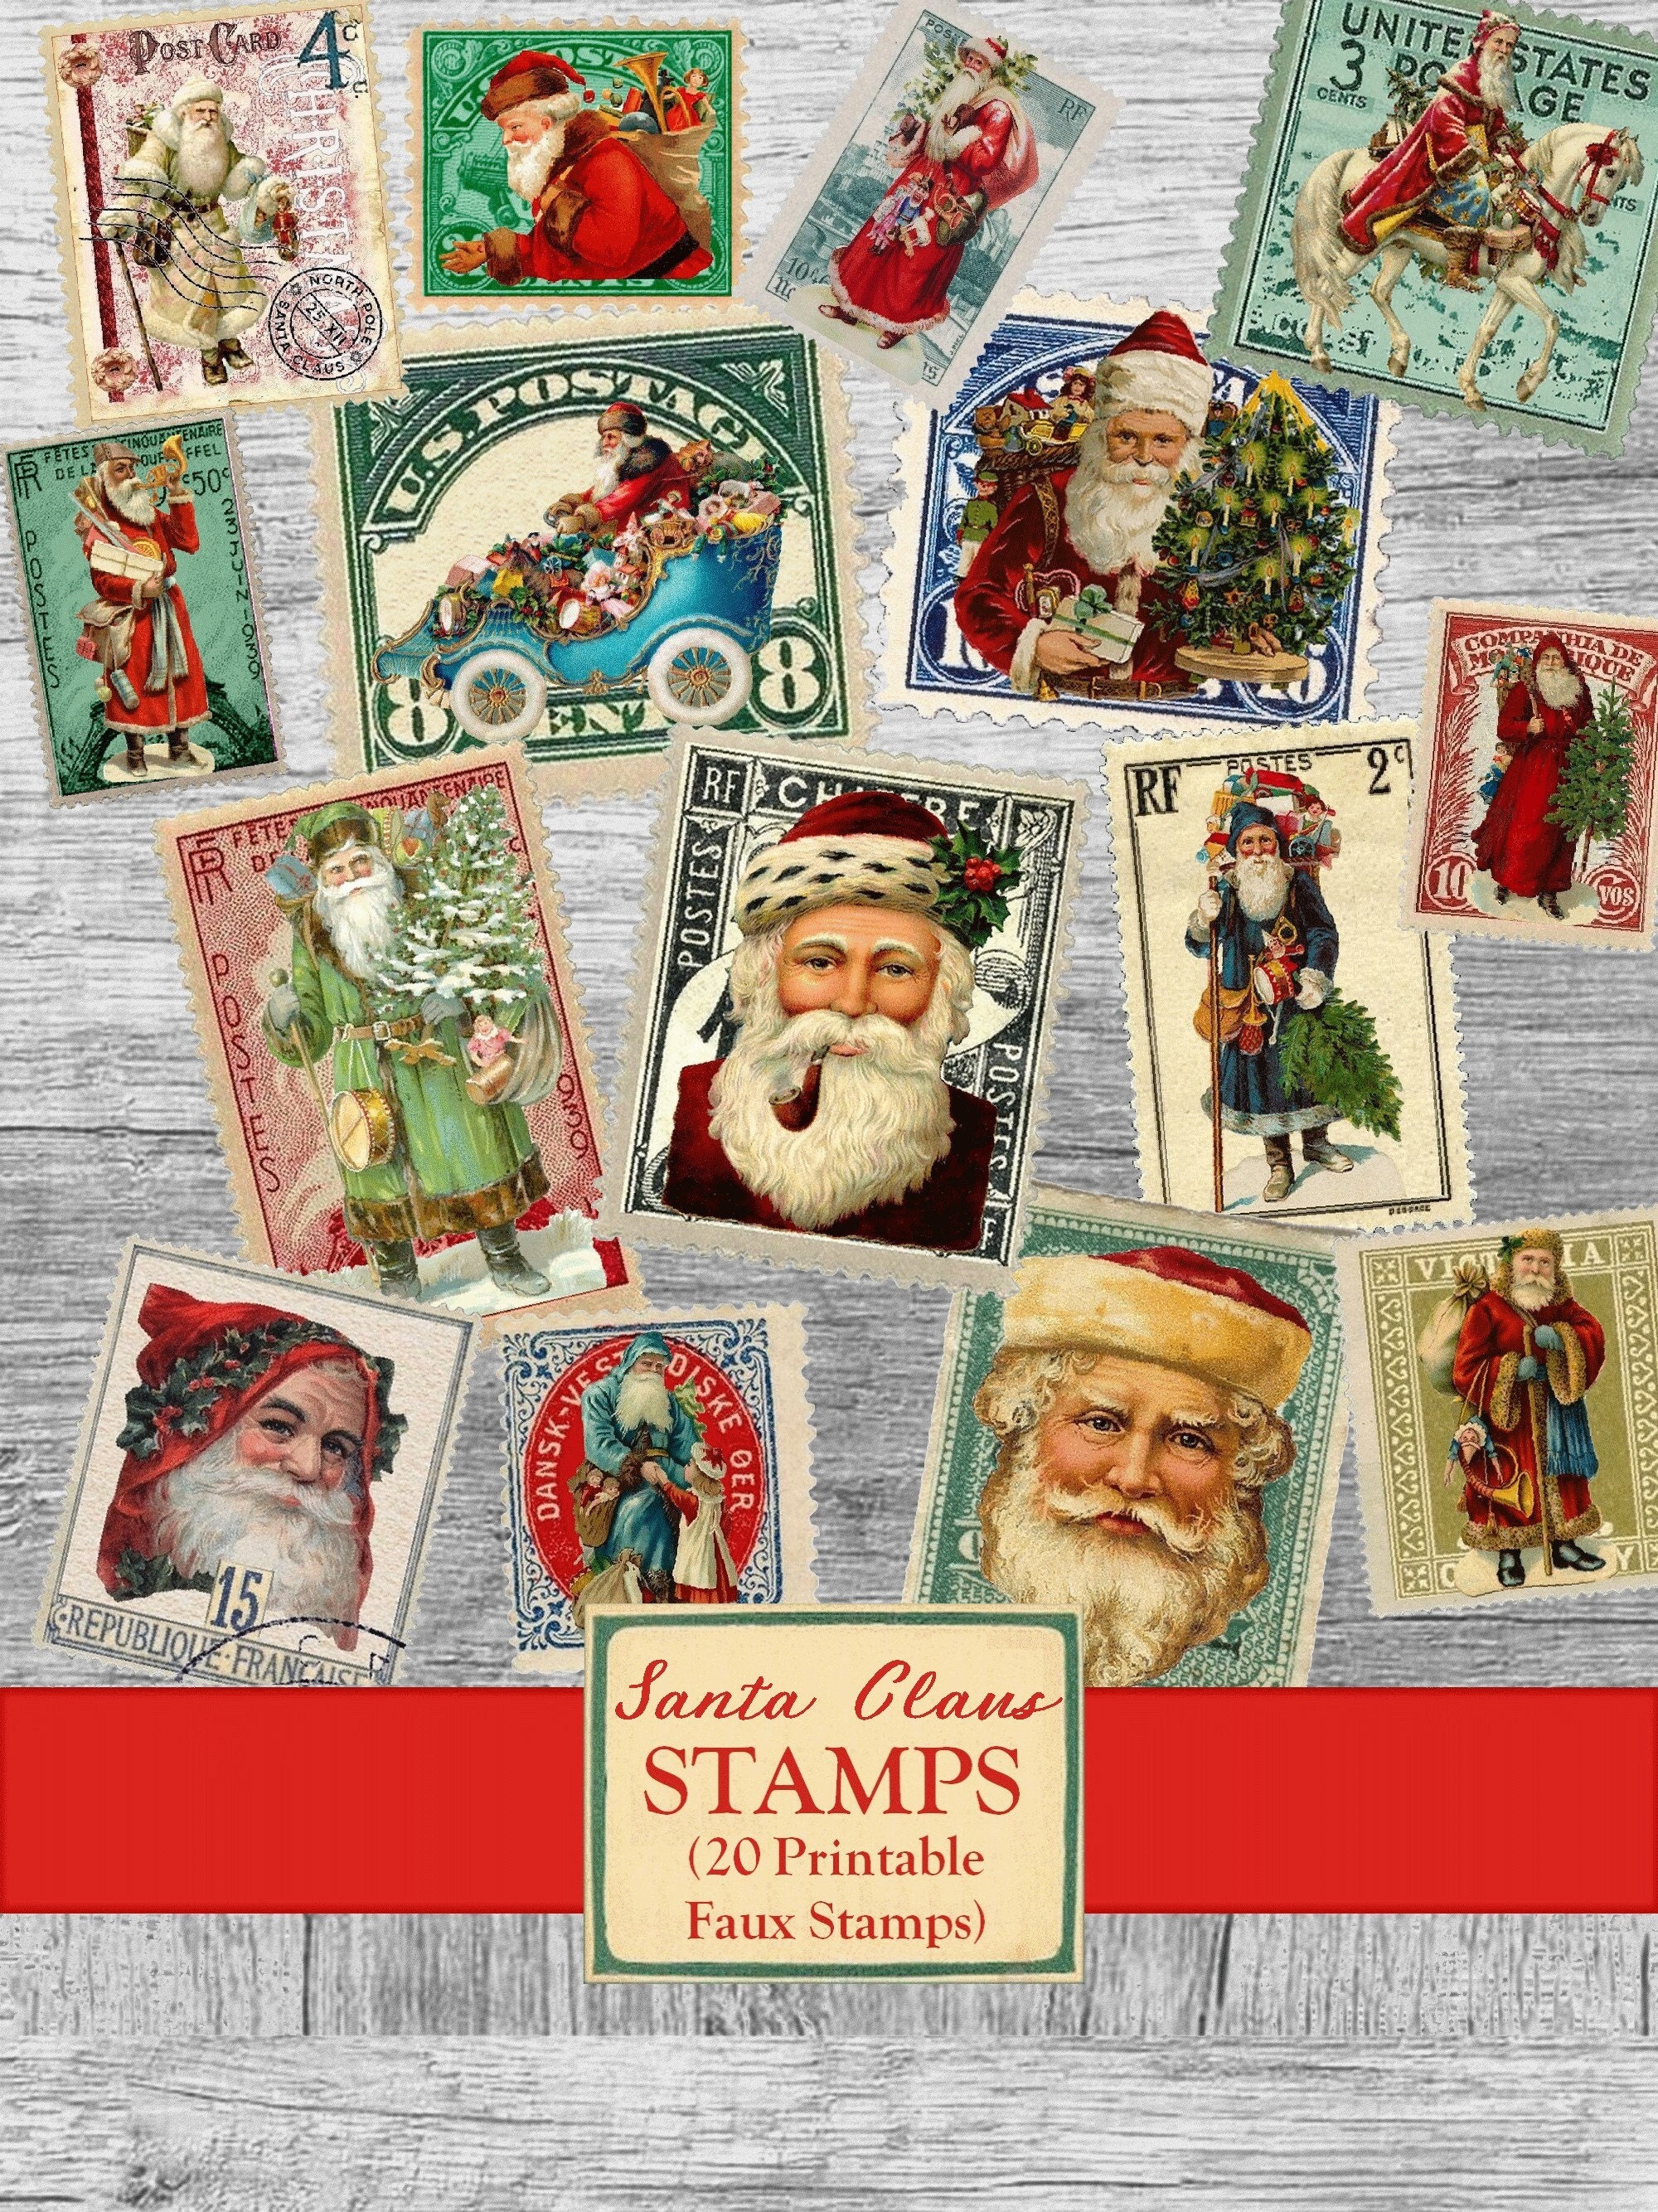 Vintage Christmas Ephemera Book: High Quality Images Of Santa Claus and  Moose For Paper Crafts, Scrapbooking, Mixed Media, Junk Journals,  Decorative